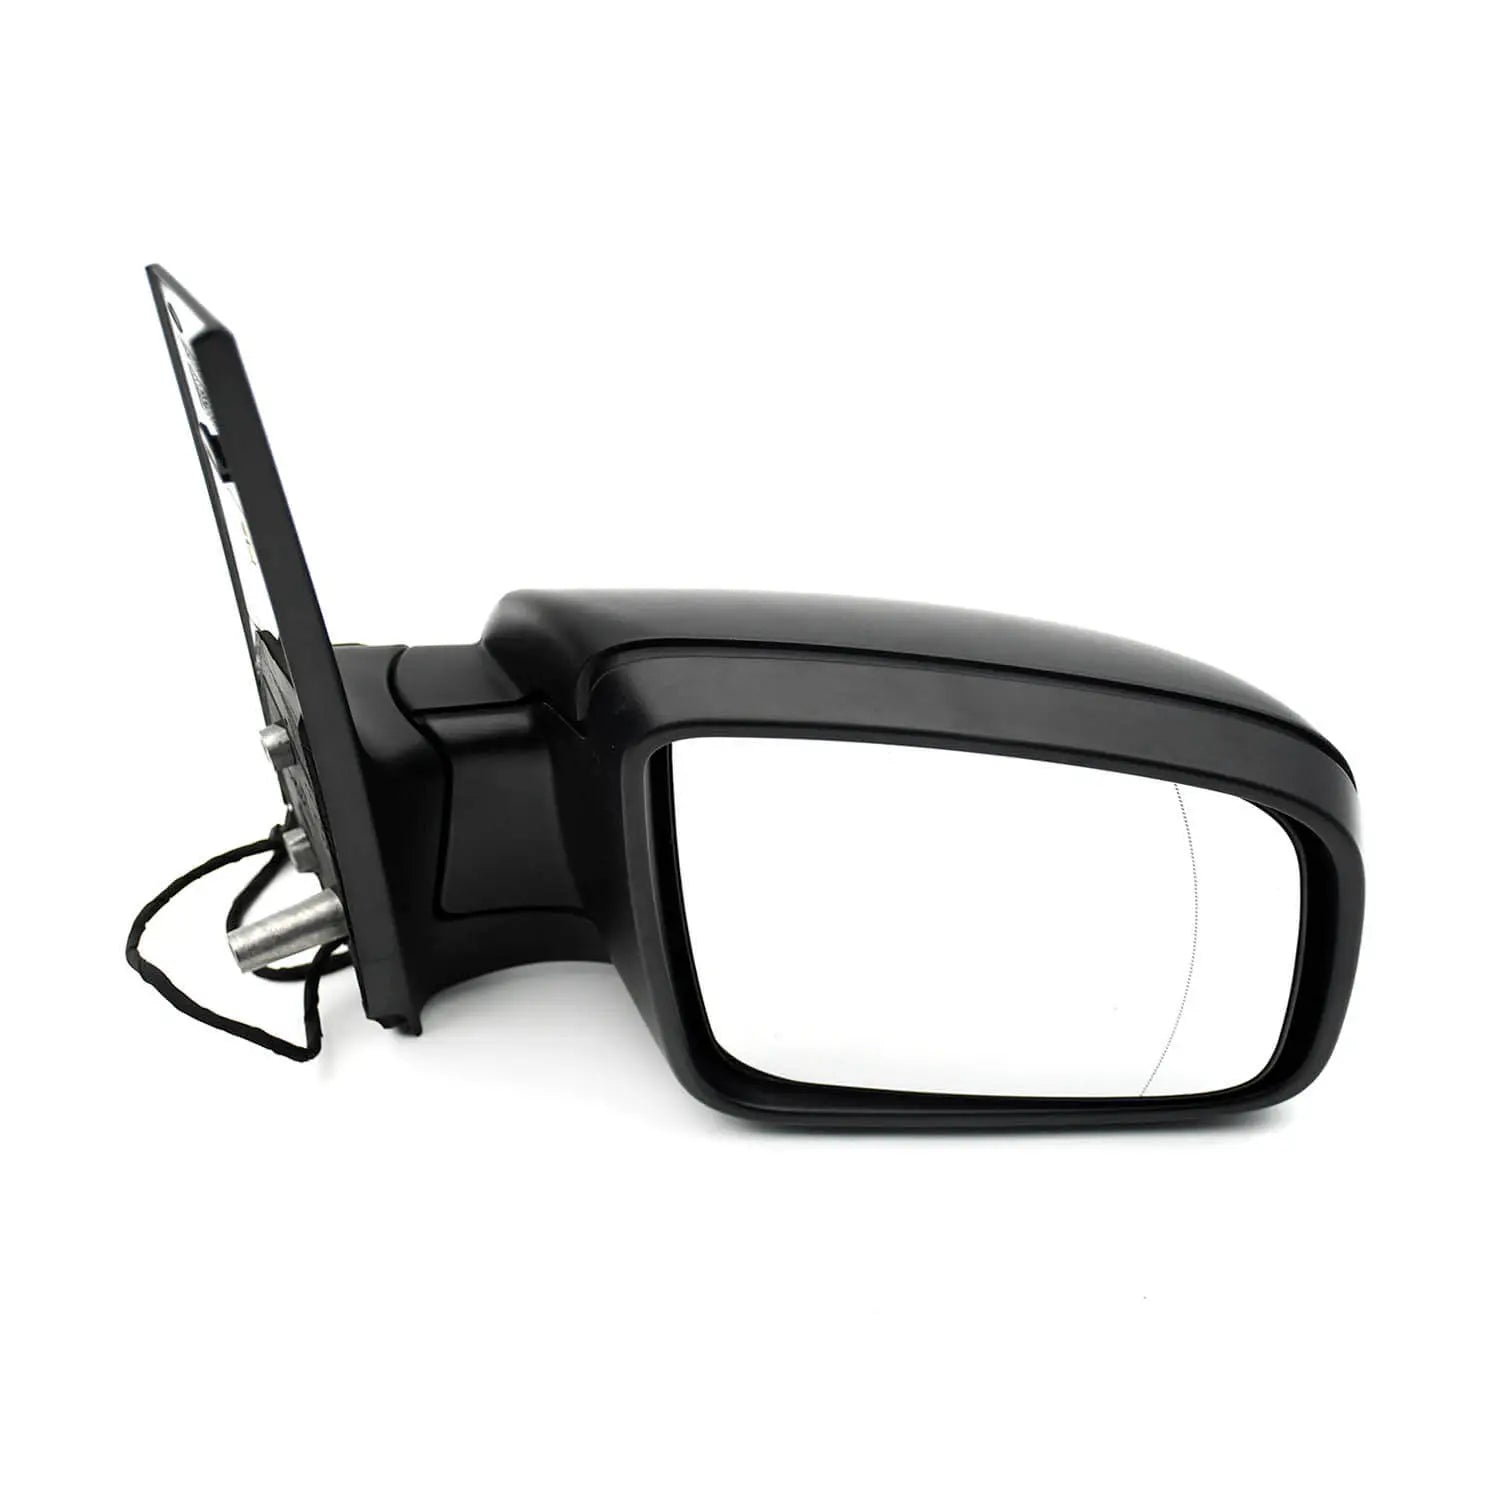 CHINA Factory Wholesale 6398100919 6398100819 ELECTRONIC Mirror For Mercedes-Benz Vito 2003-on FANCHANTS China Auto Parts Wholesales